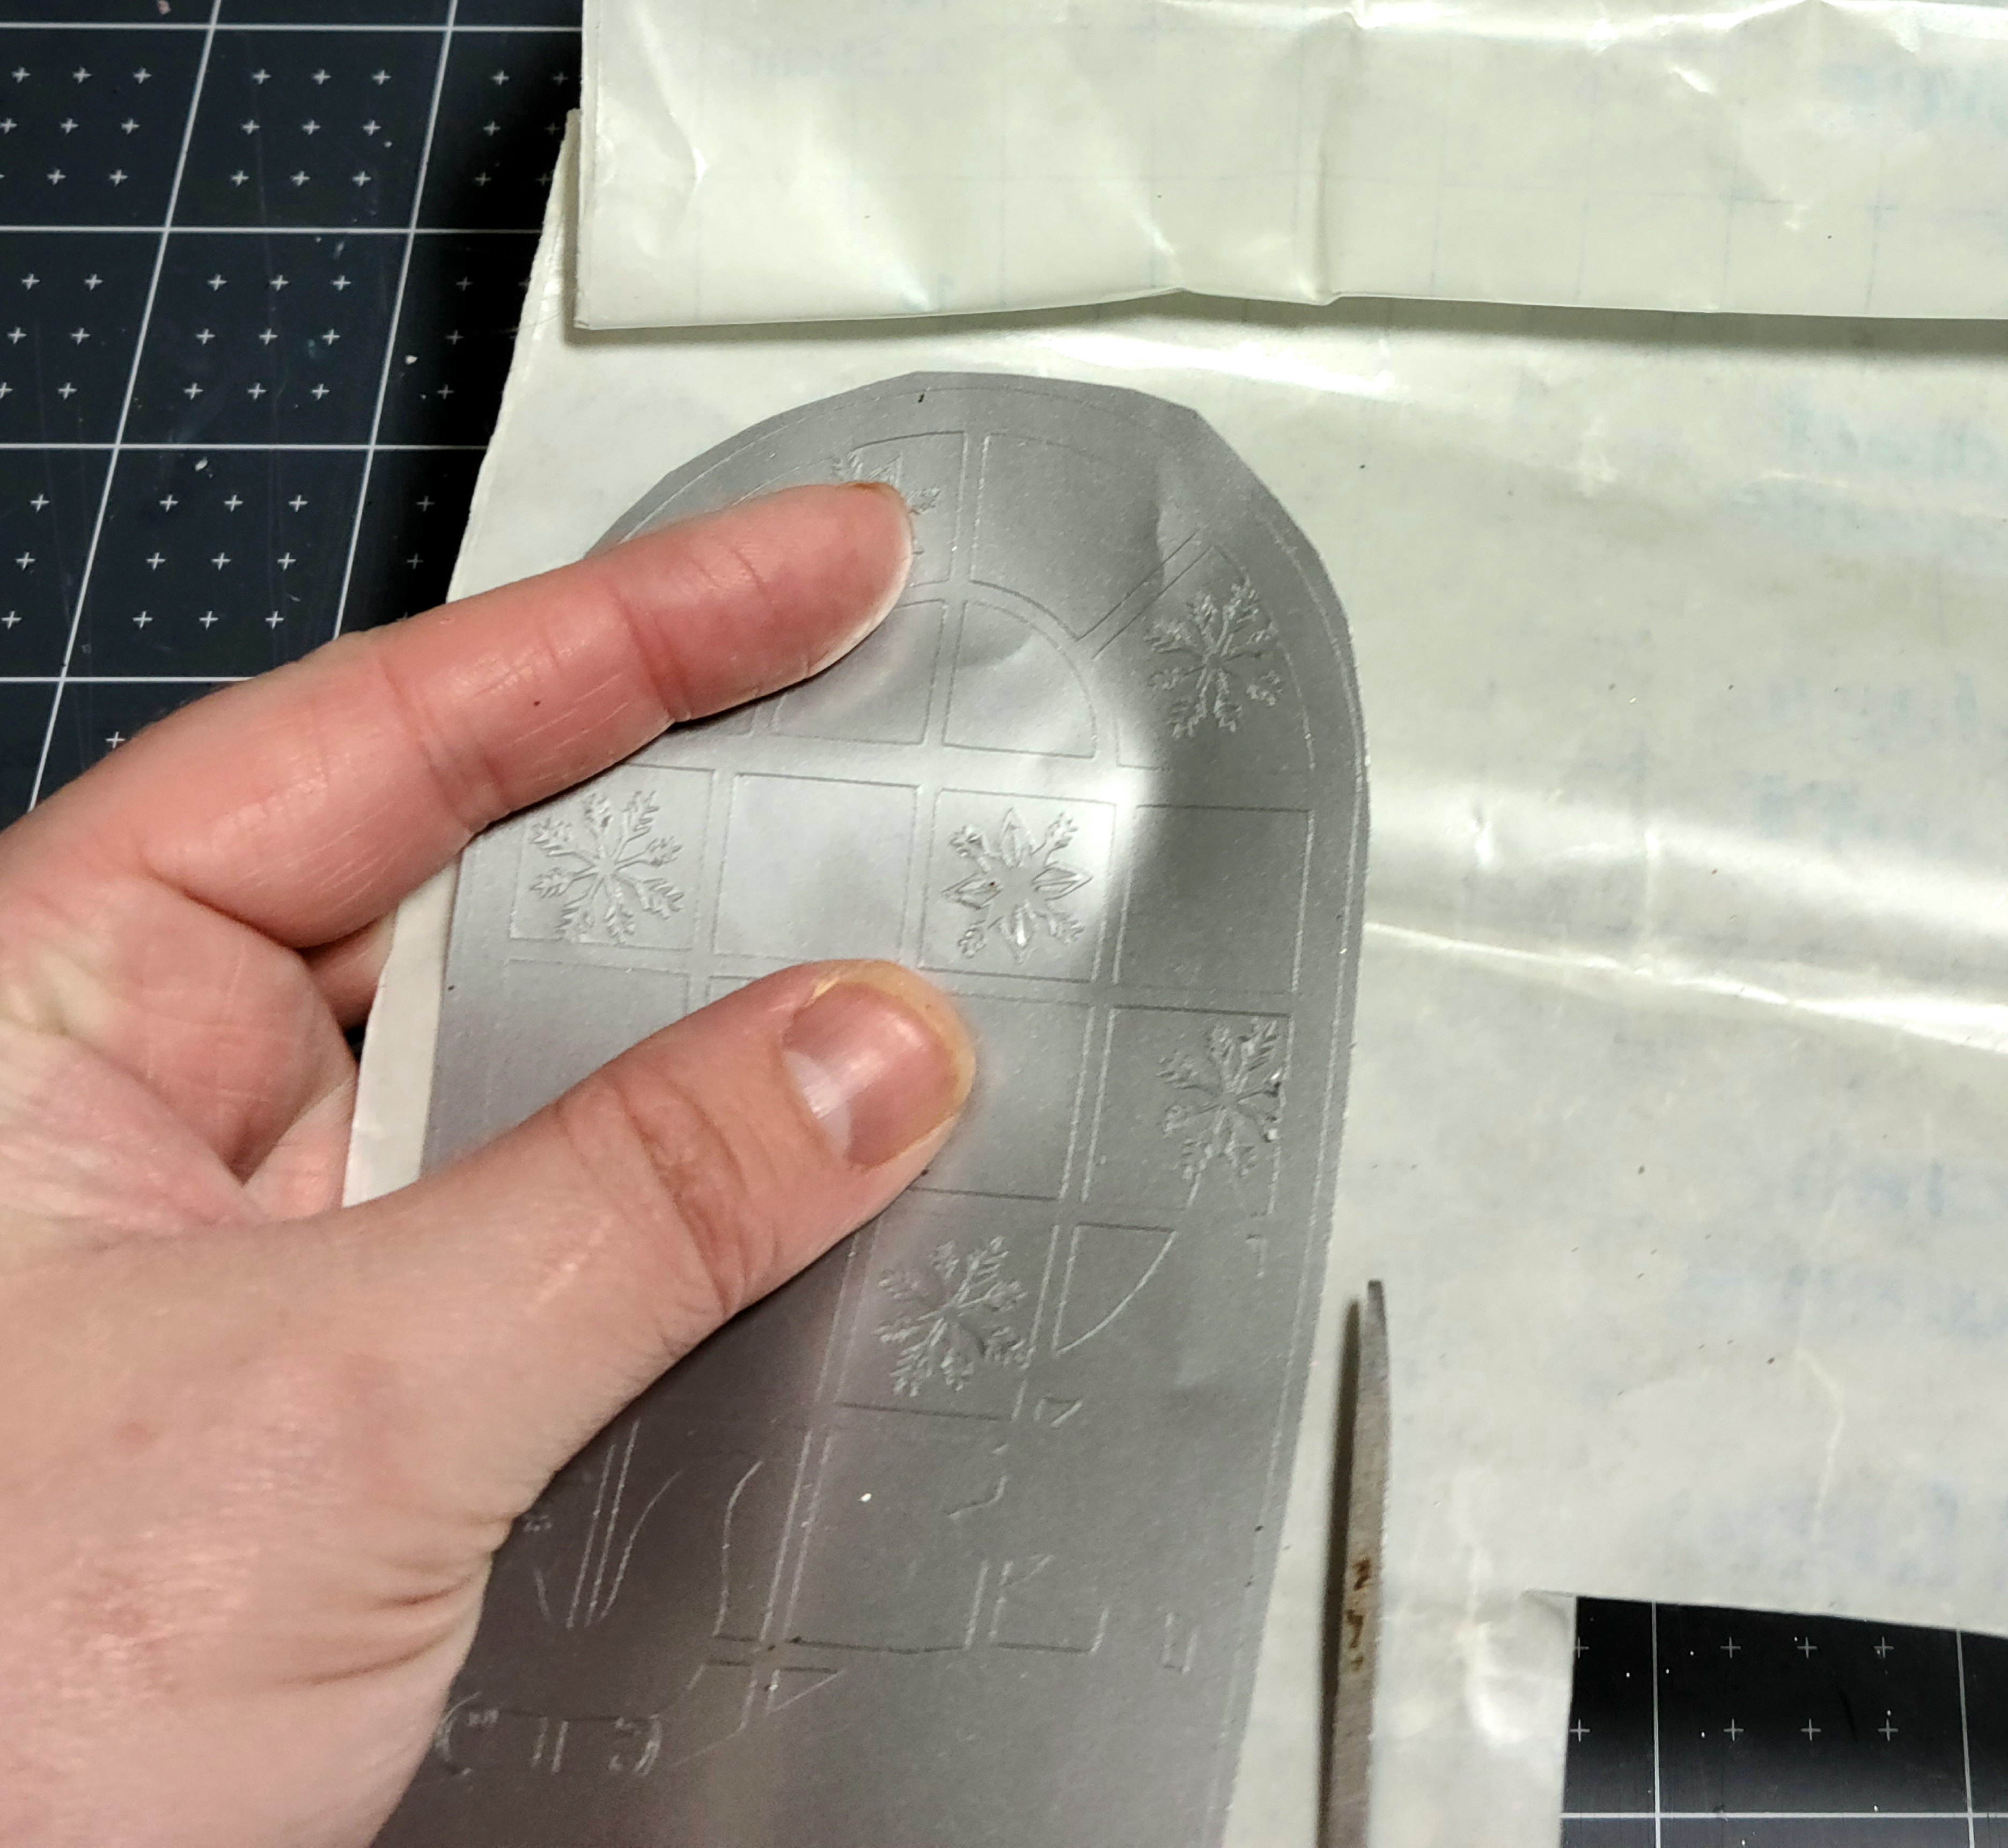 Cutting a piece of contact paper that's just a bit larger than the silver vinyl window-scape design.